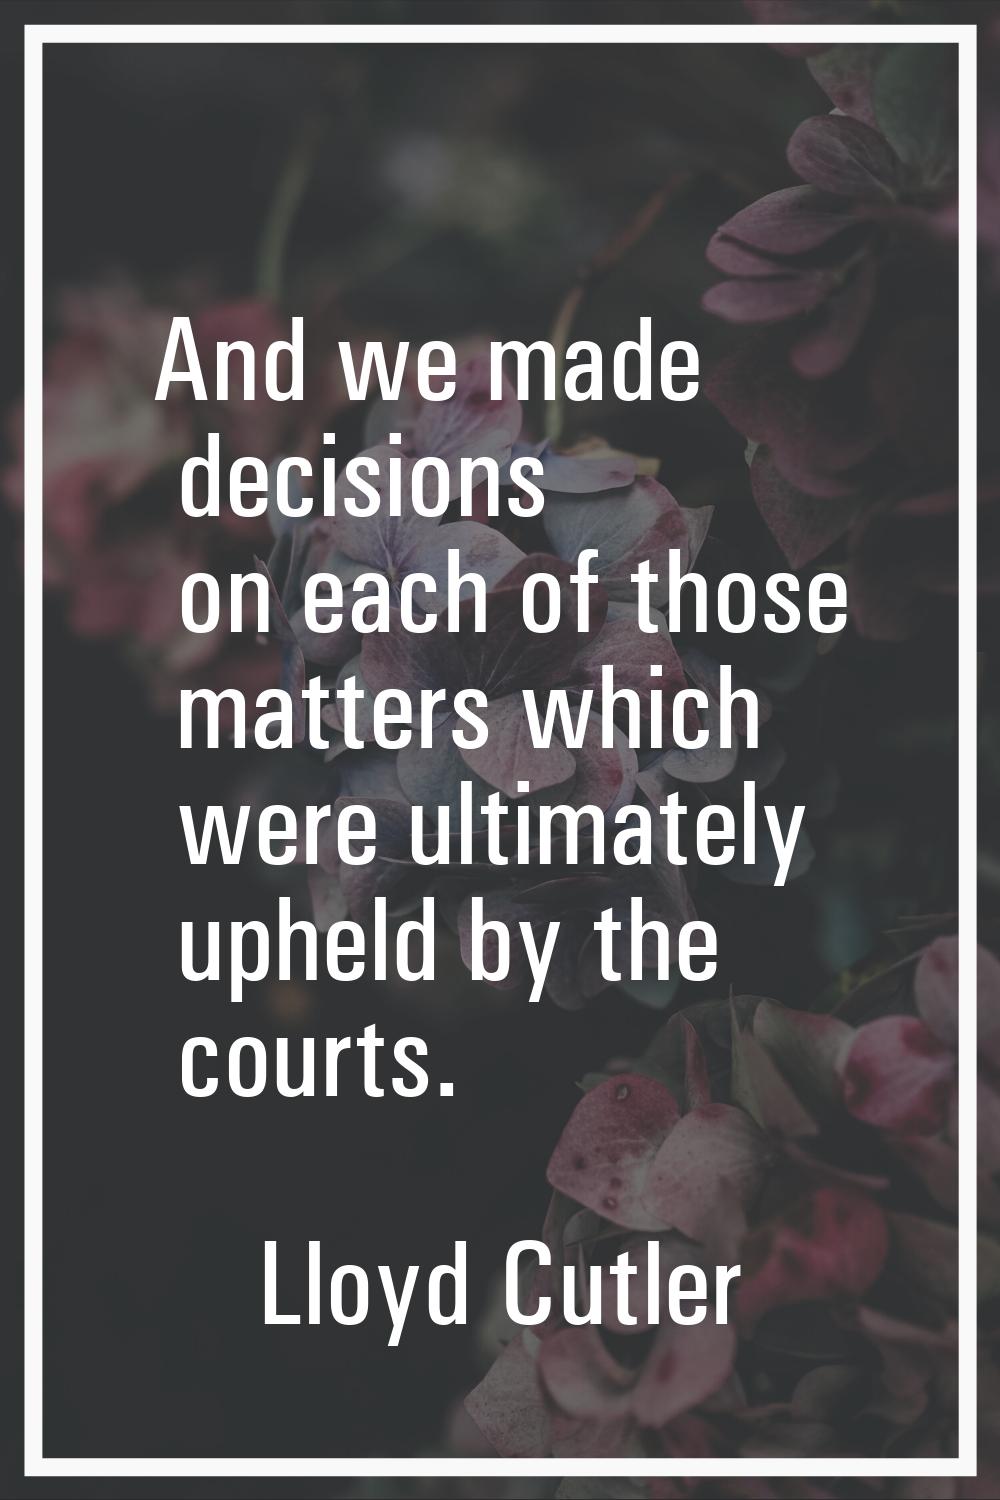 And we made decisions on each of those matters which were ultimately upheld by the courts.